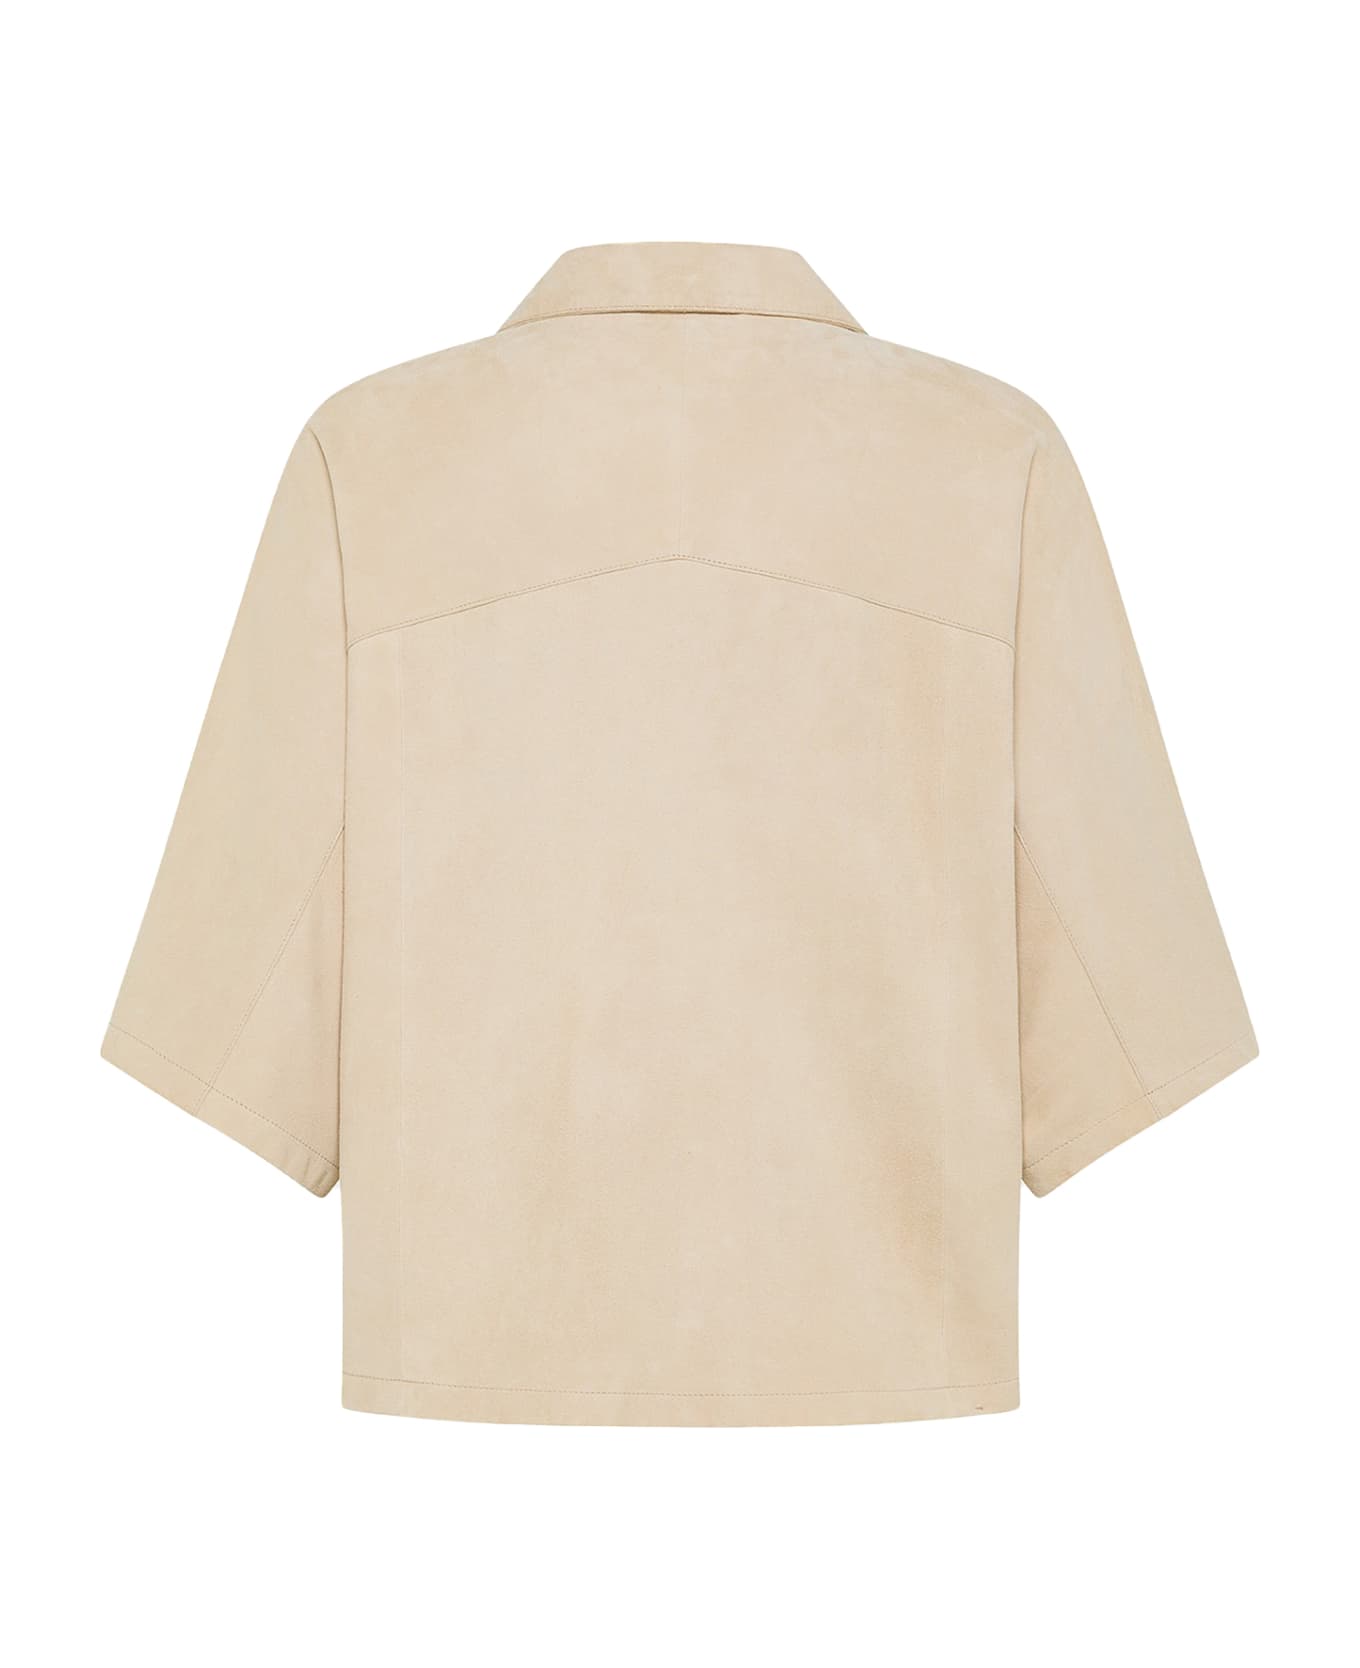 Seventy Beige Cape With Buttons - BEIGE